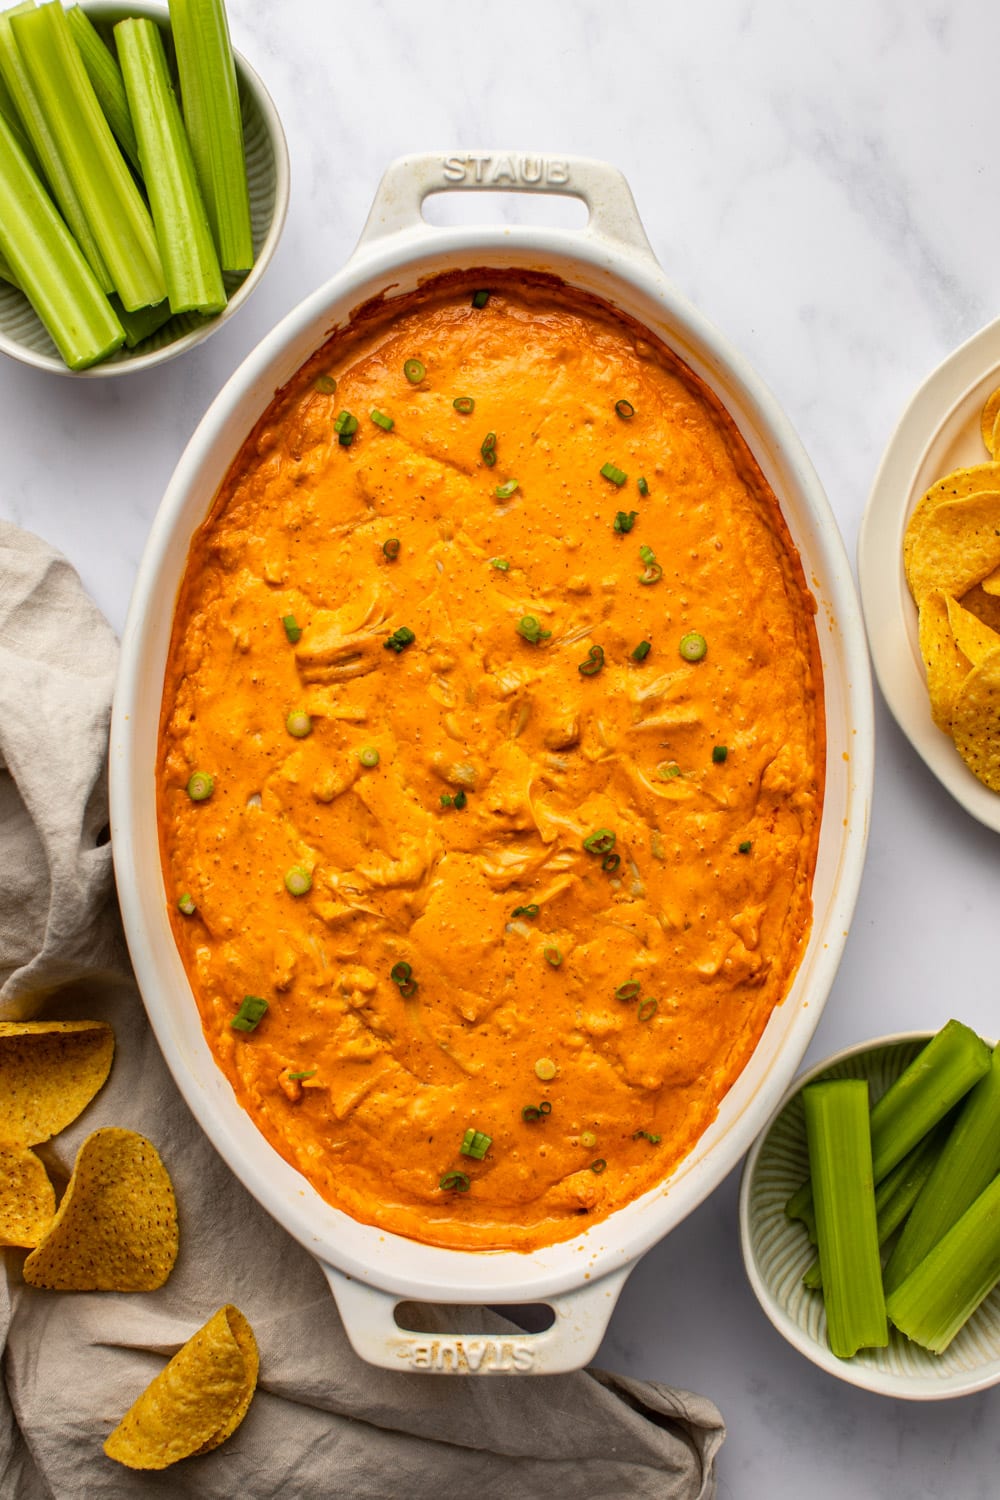 vegan buffalo chicken dip freshly out of the oven in a baking dish served on a kitchen countertop, served with tortilla chips and celery